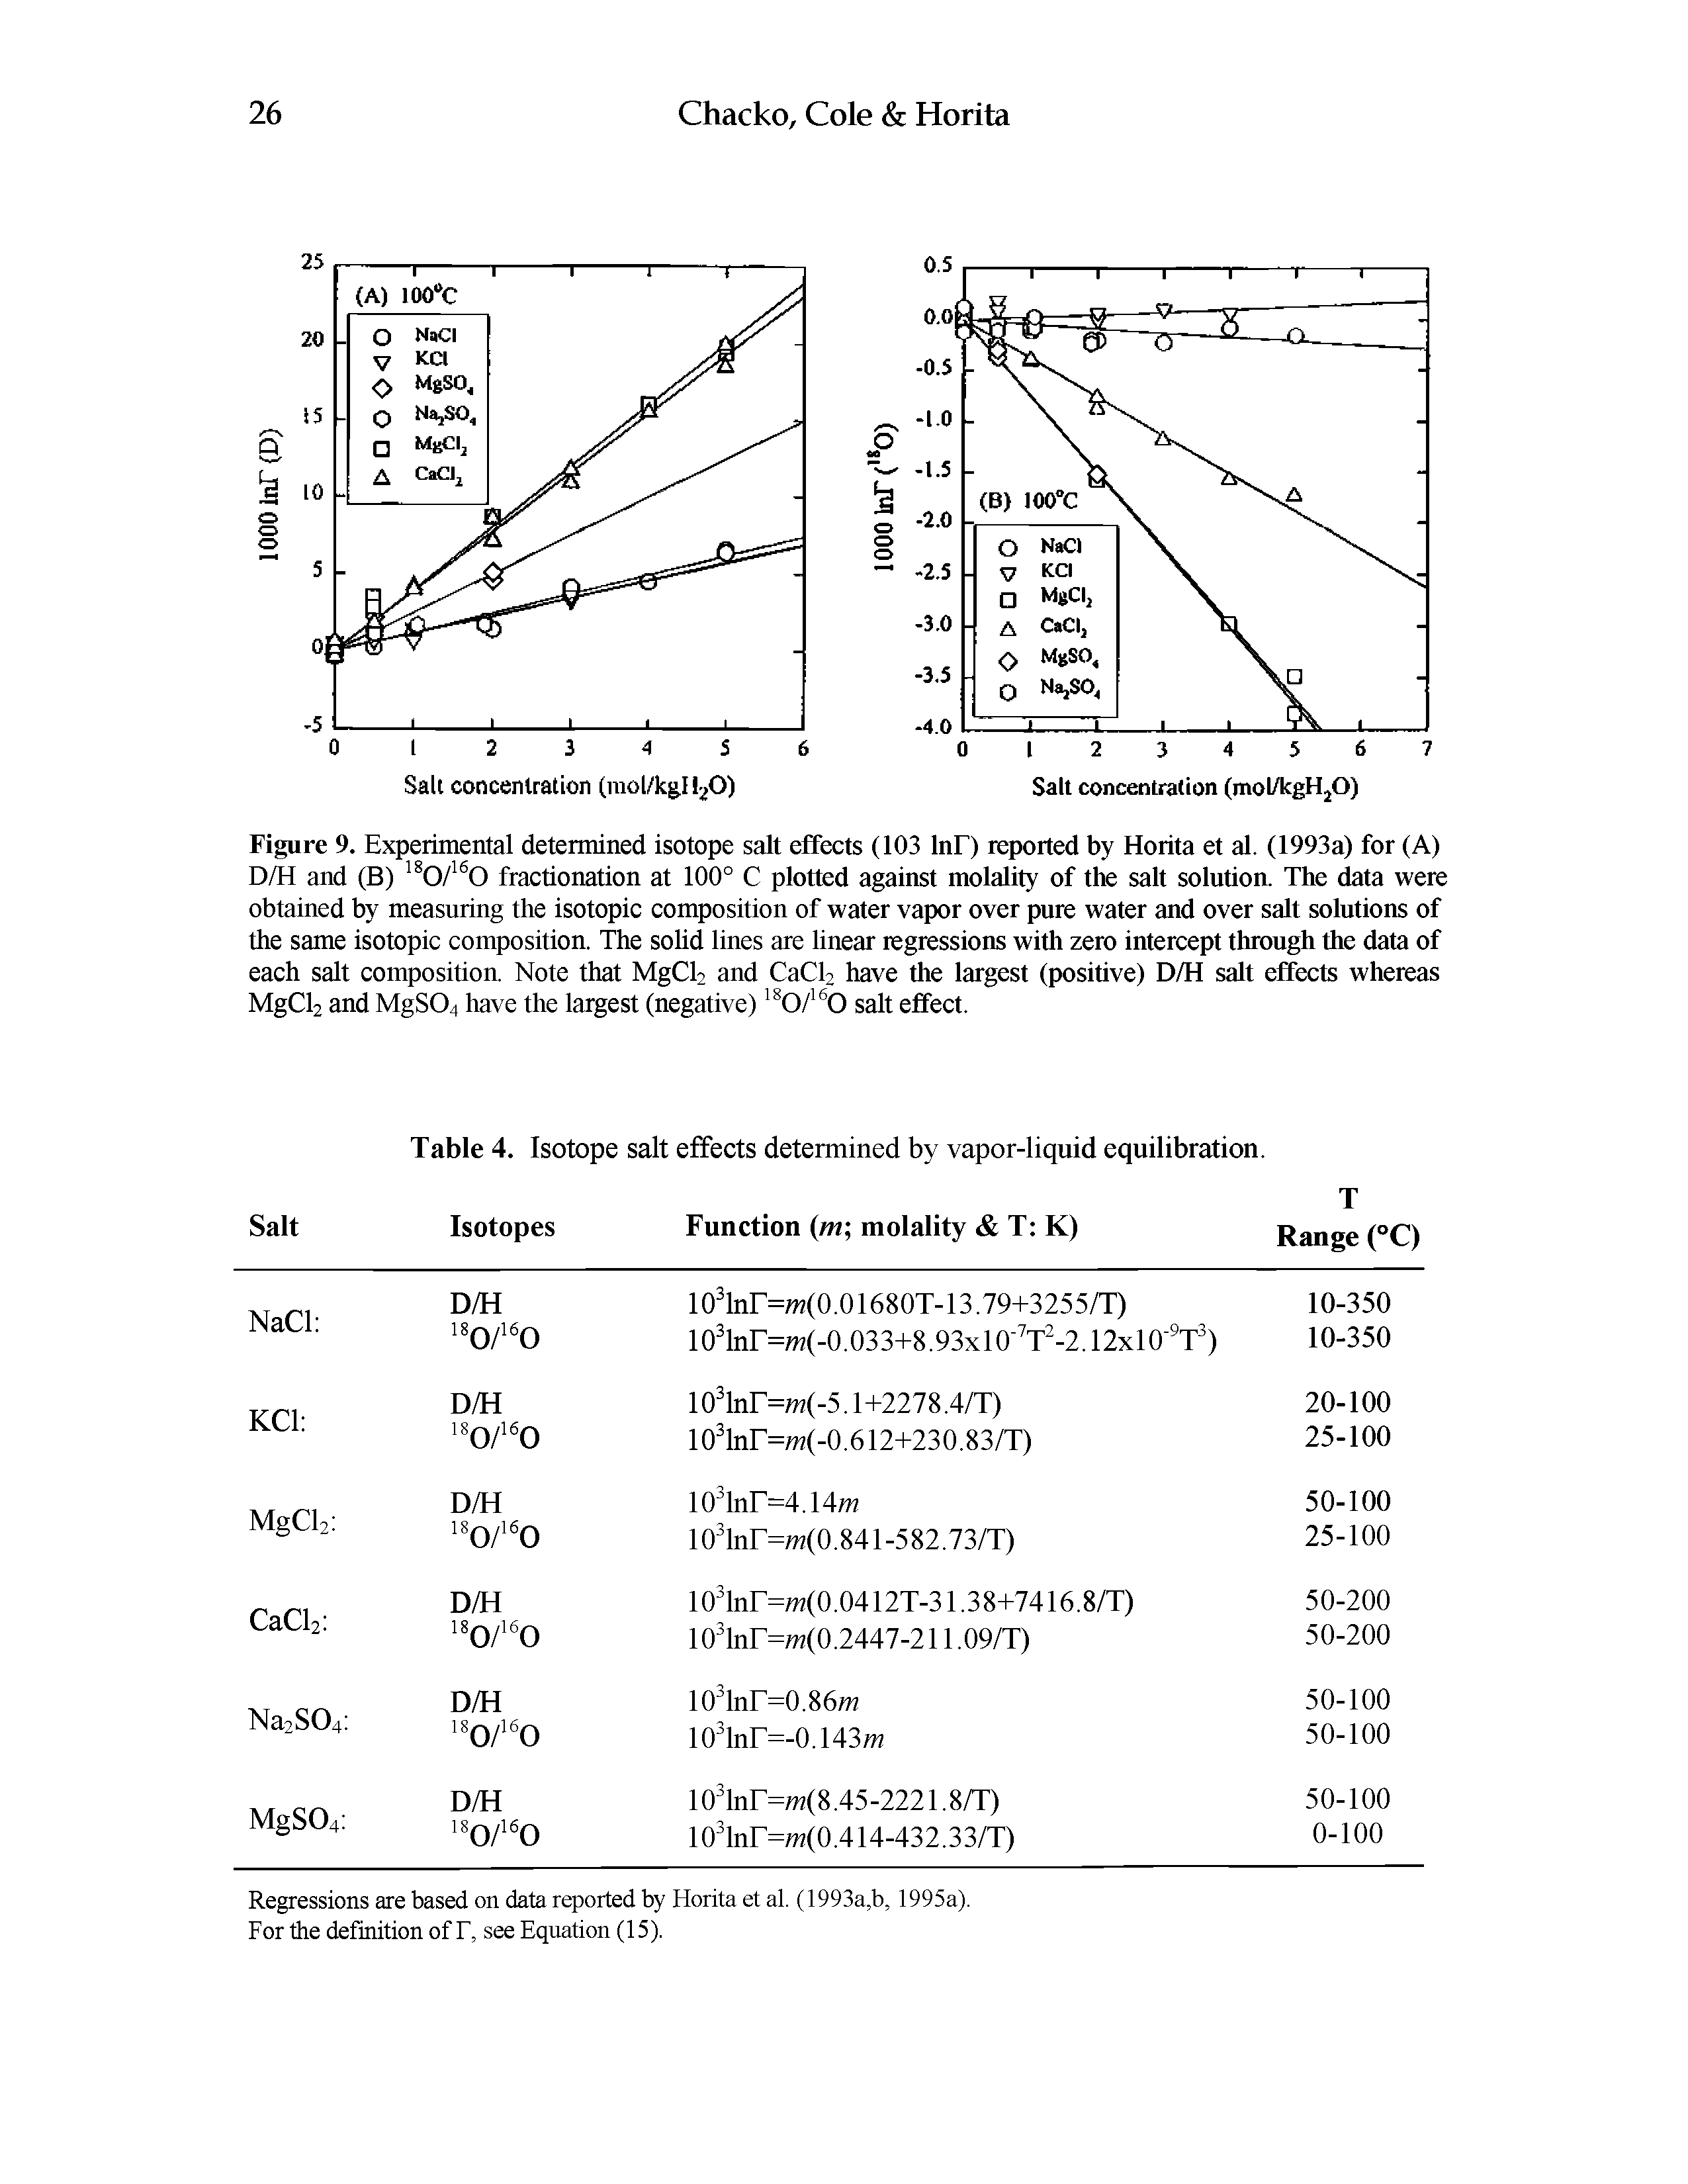 Figure 9. Experimental determined isotope salt effects (103 InF) reported by Horita et al. (1993a) for (A) D/H and (B) fractionation at 100° C plotted against molality of the salt solution. The data were...